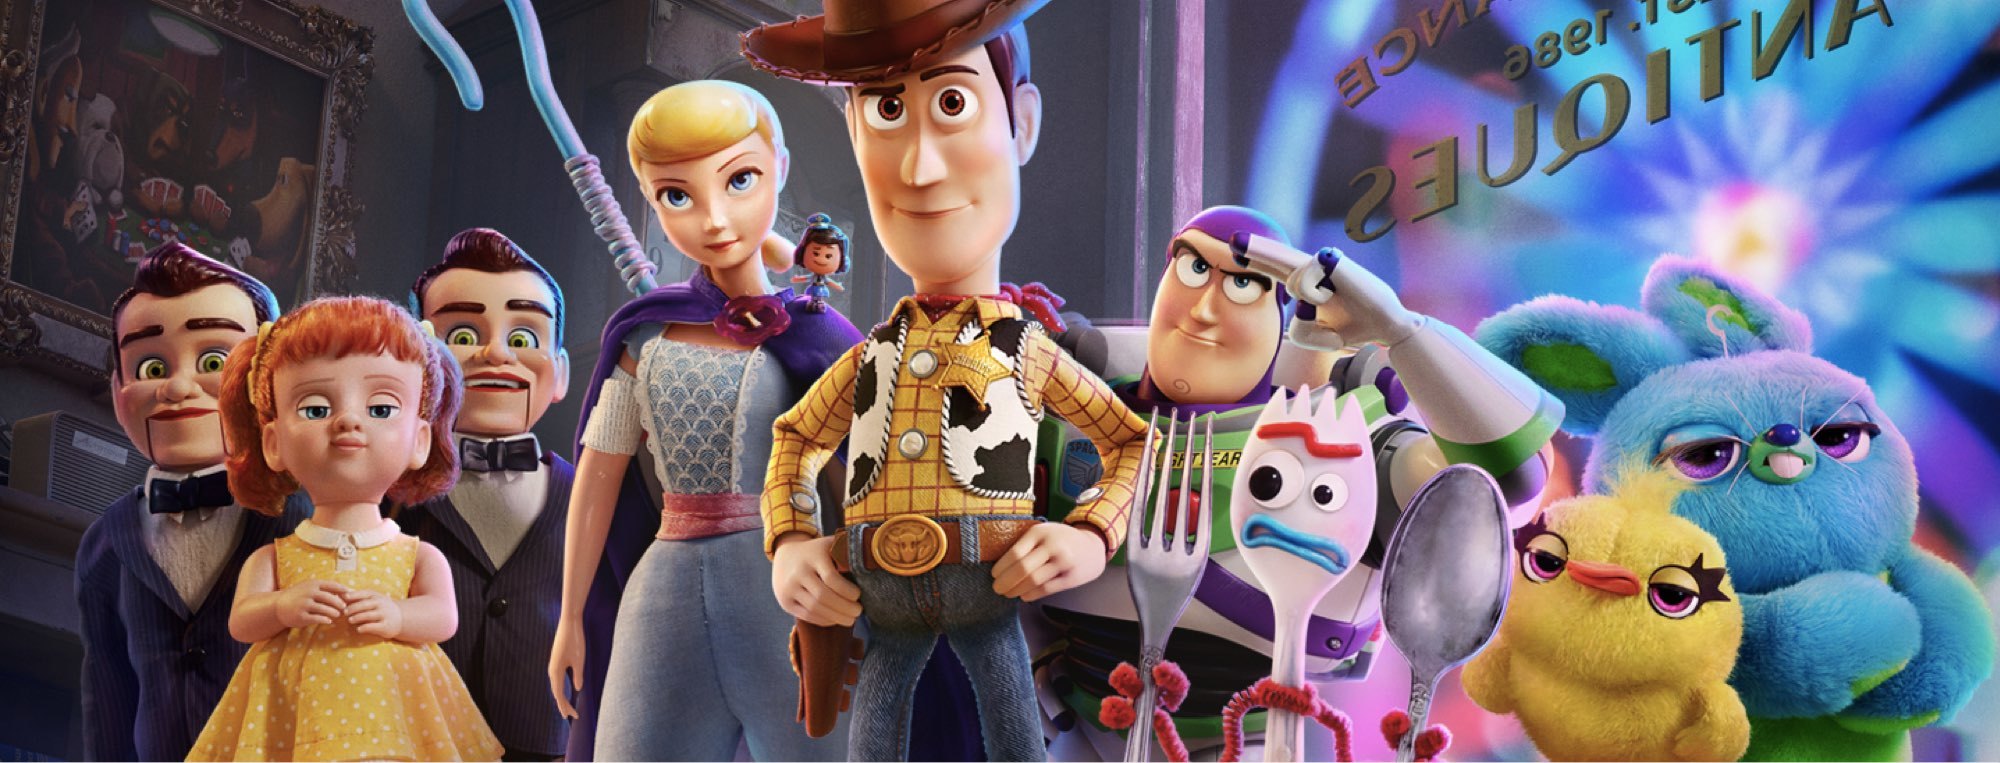 download the new version for mac Toy Story 4